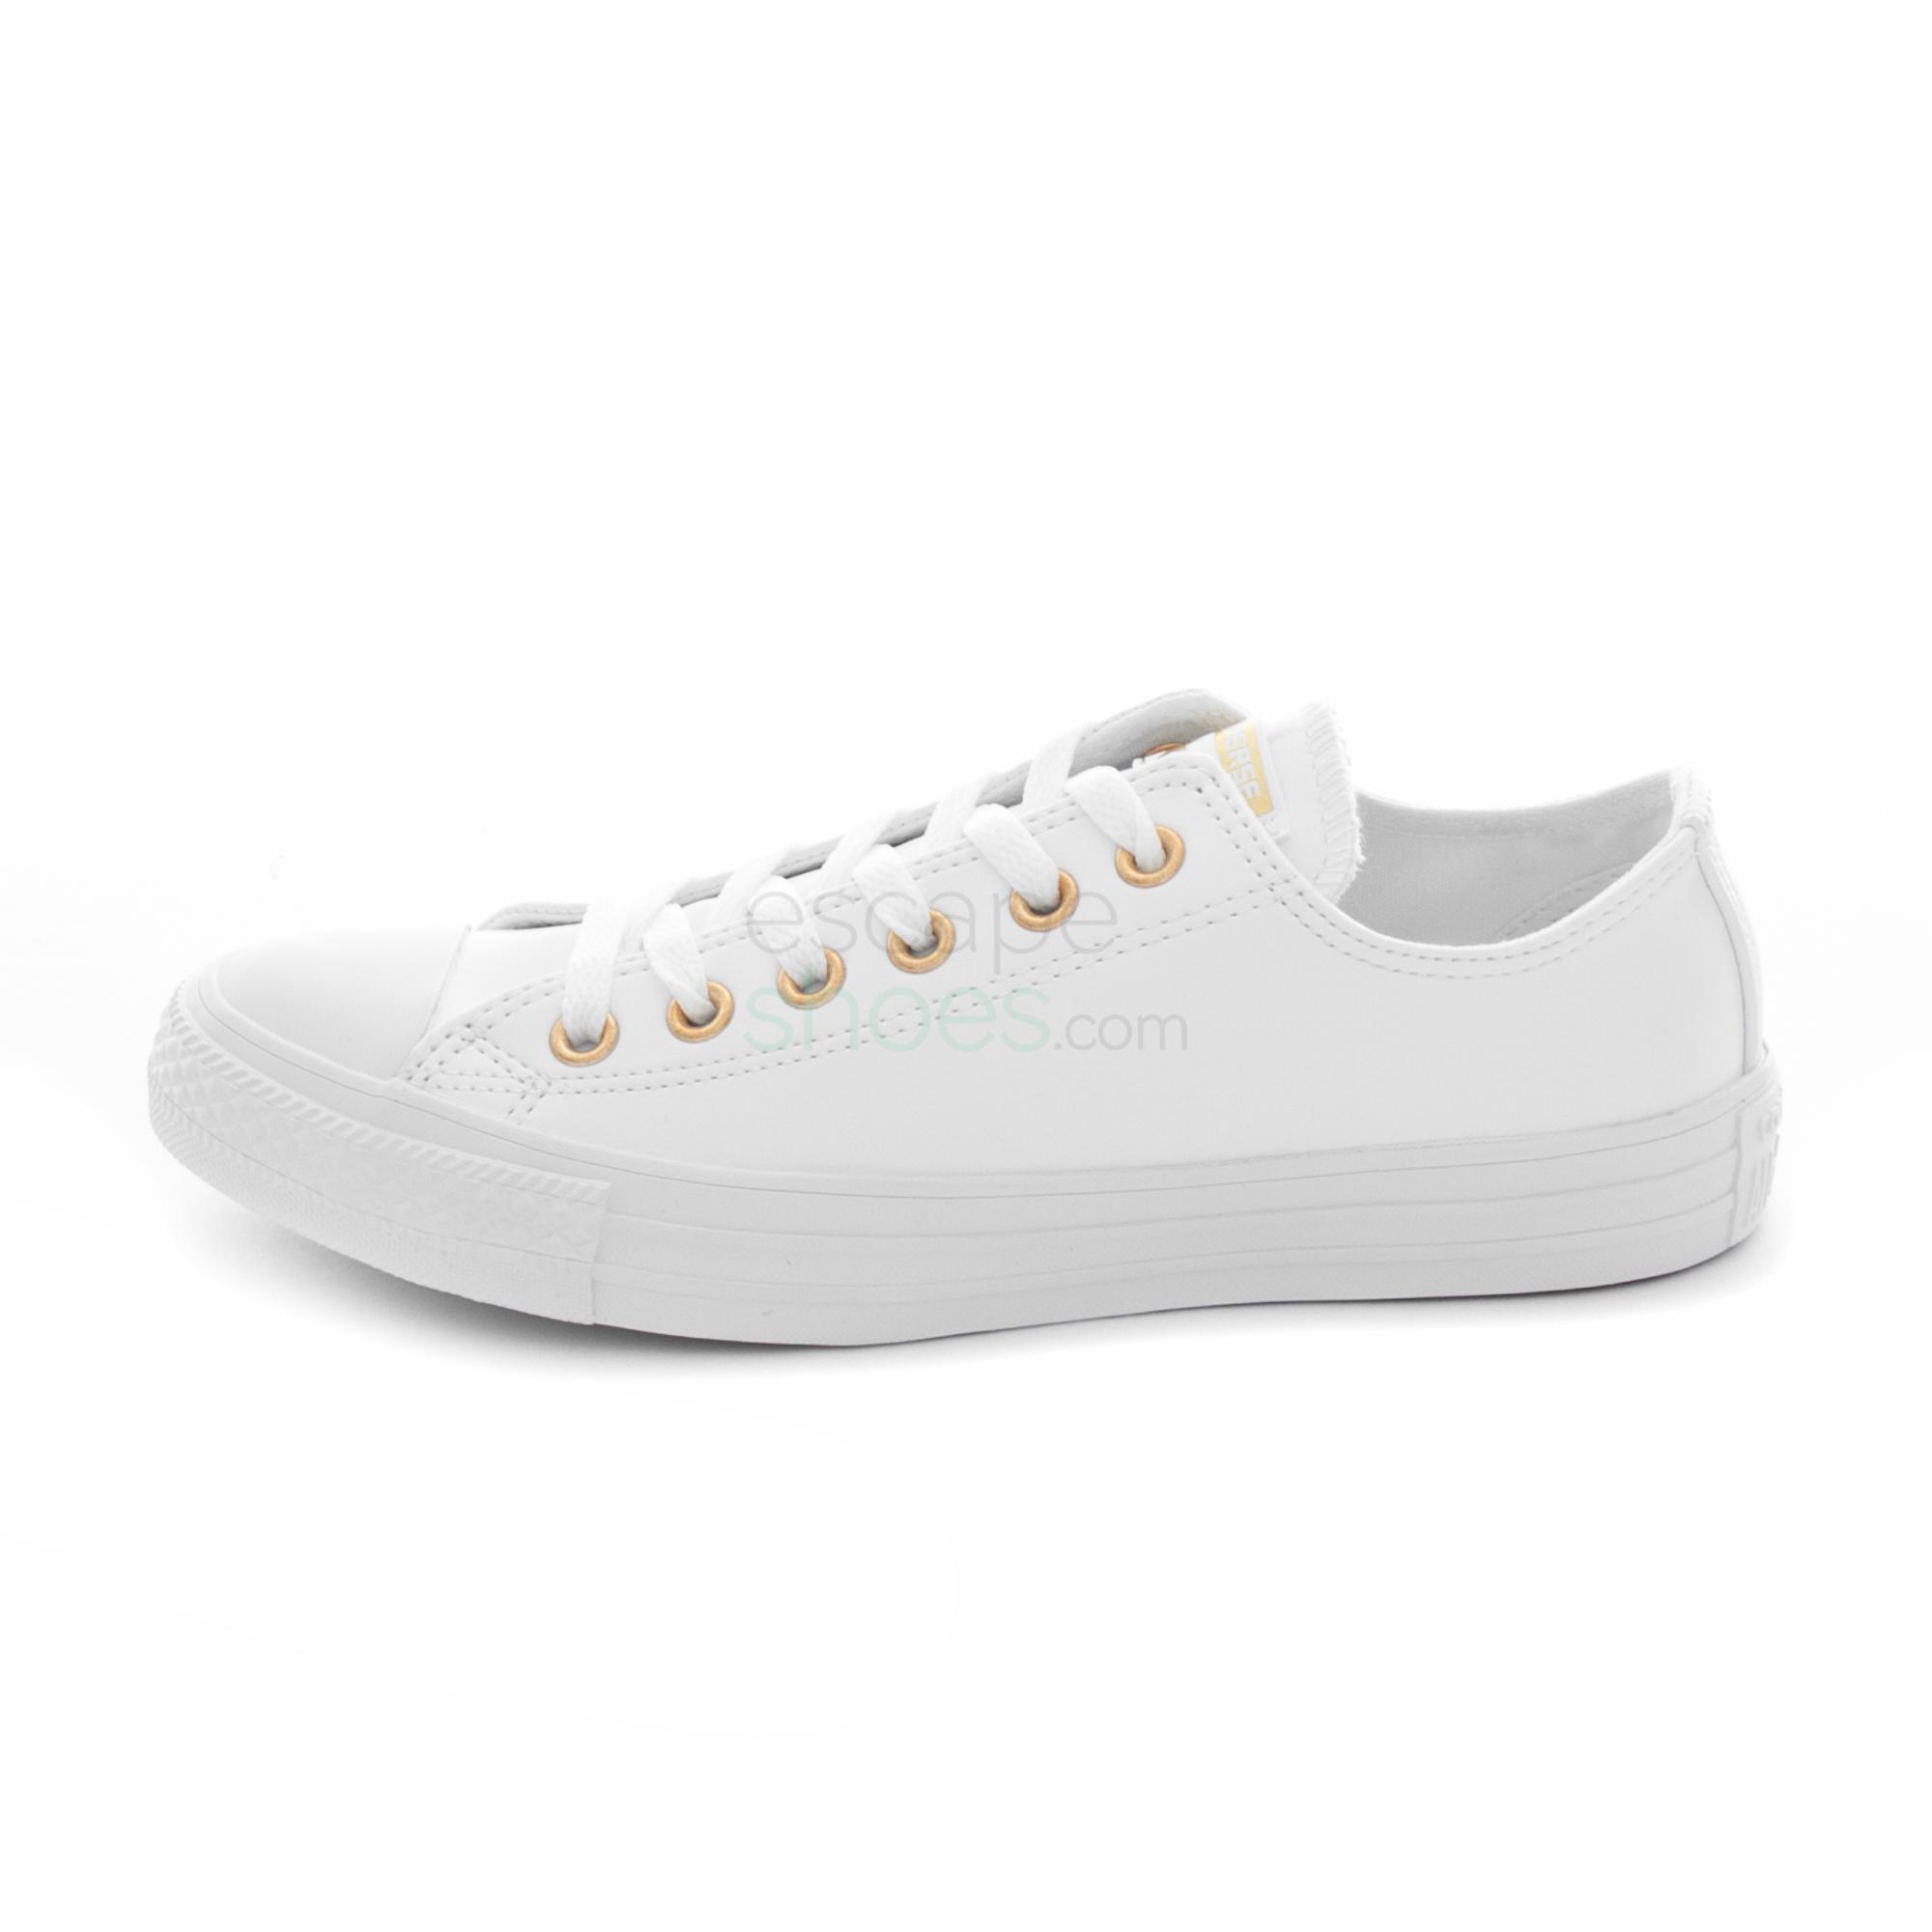 converse all star white and gold